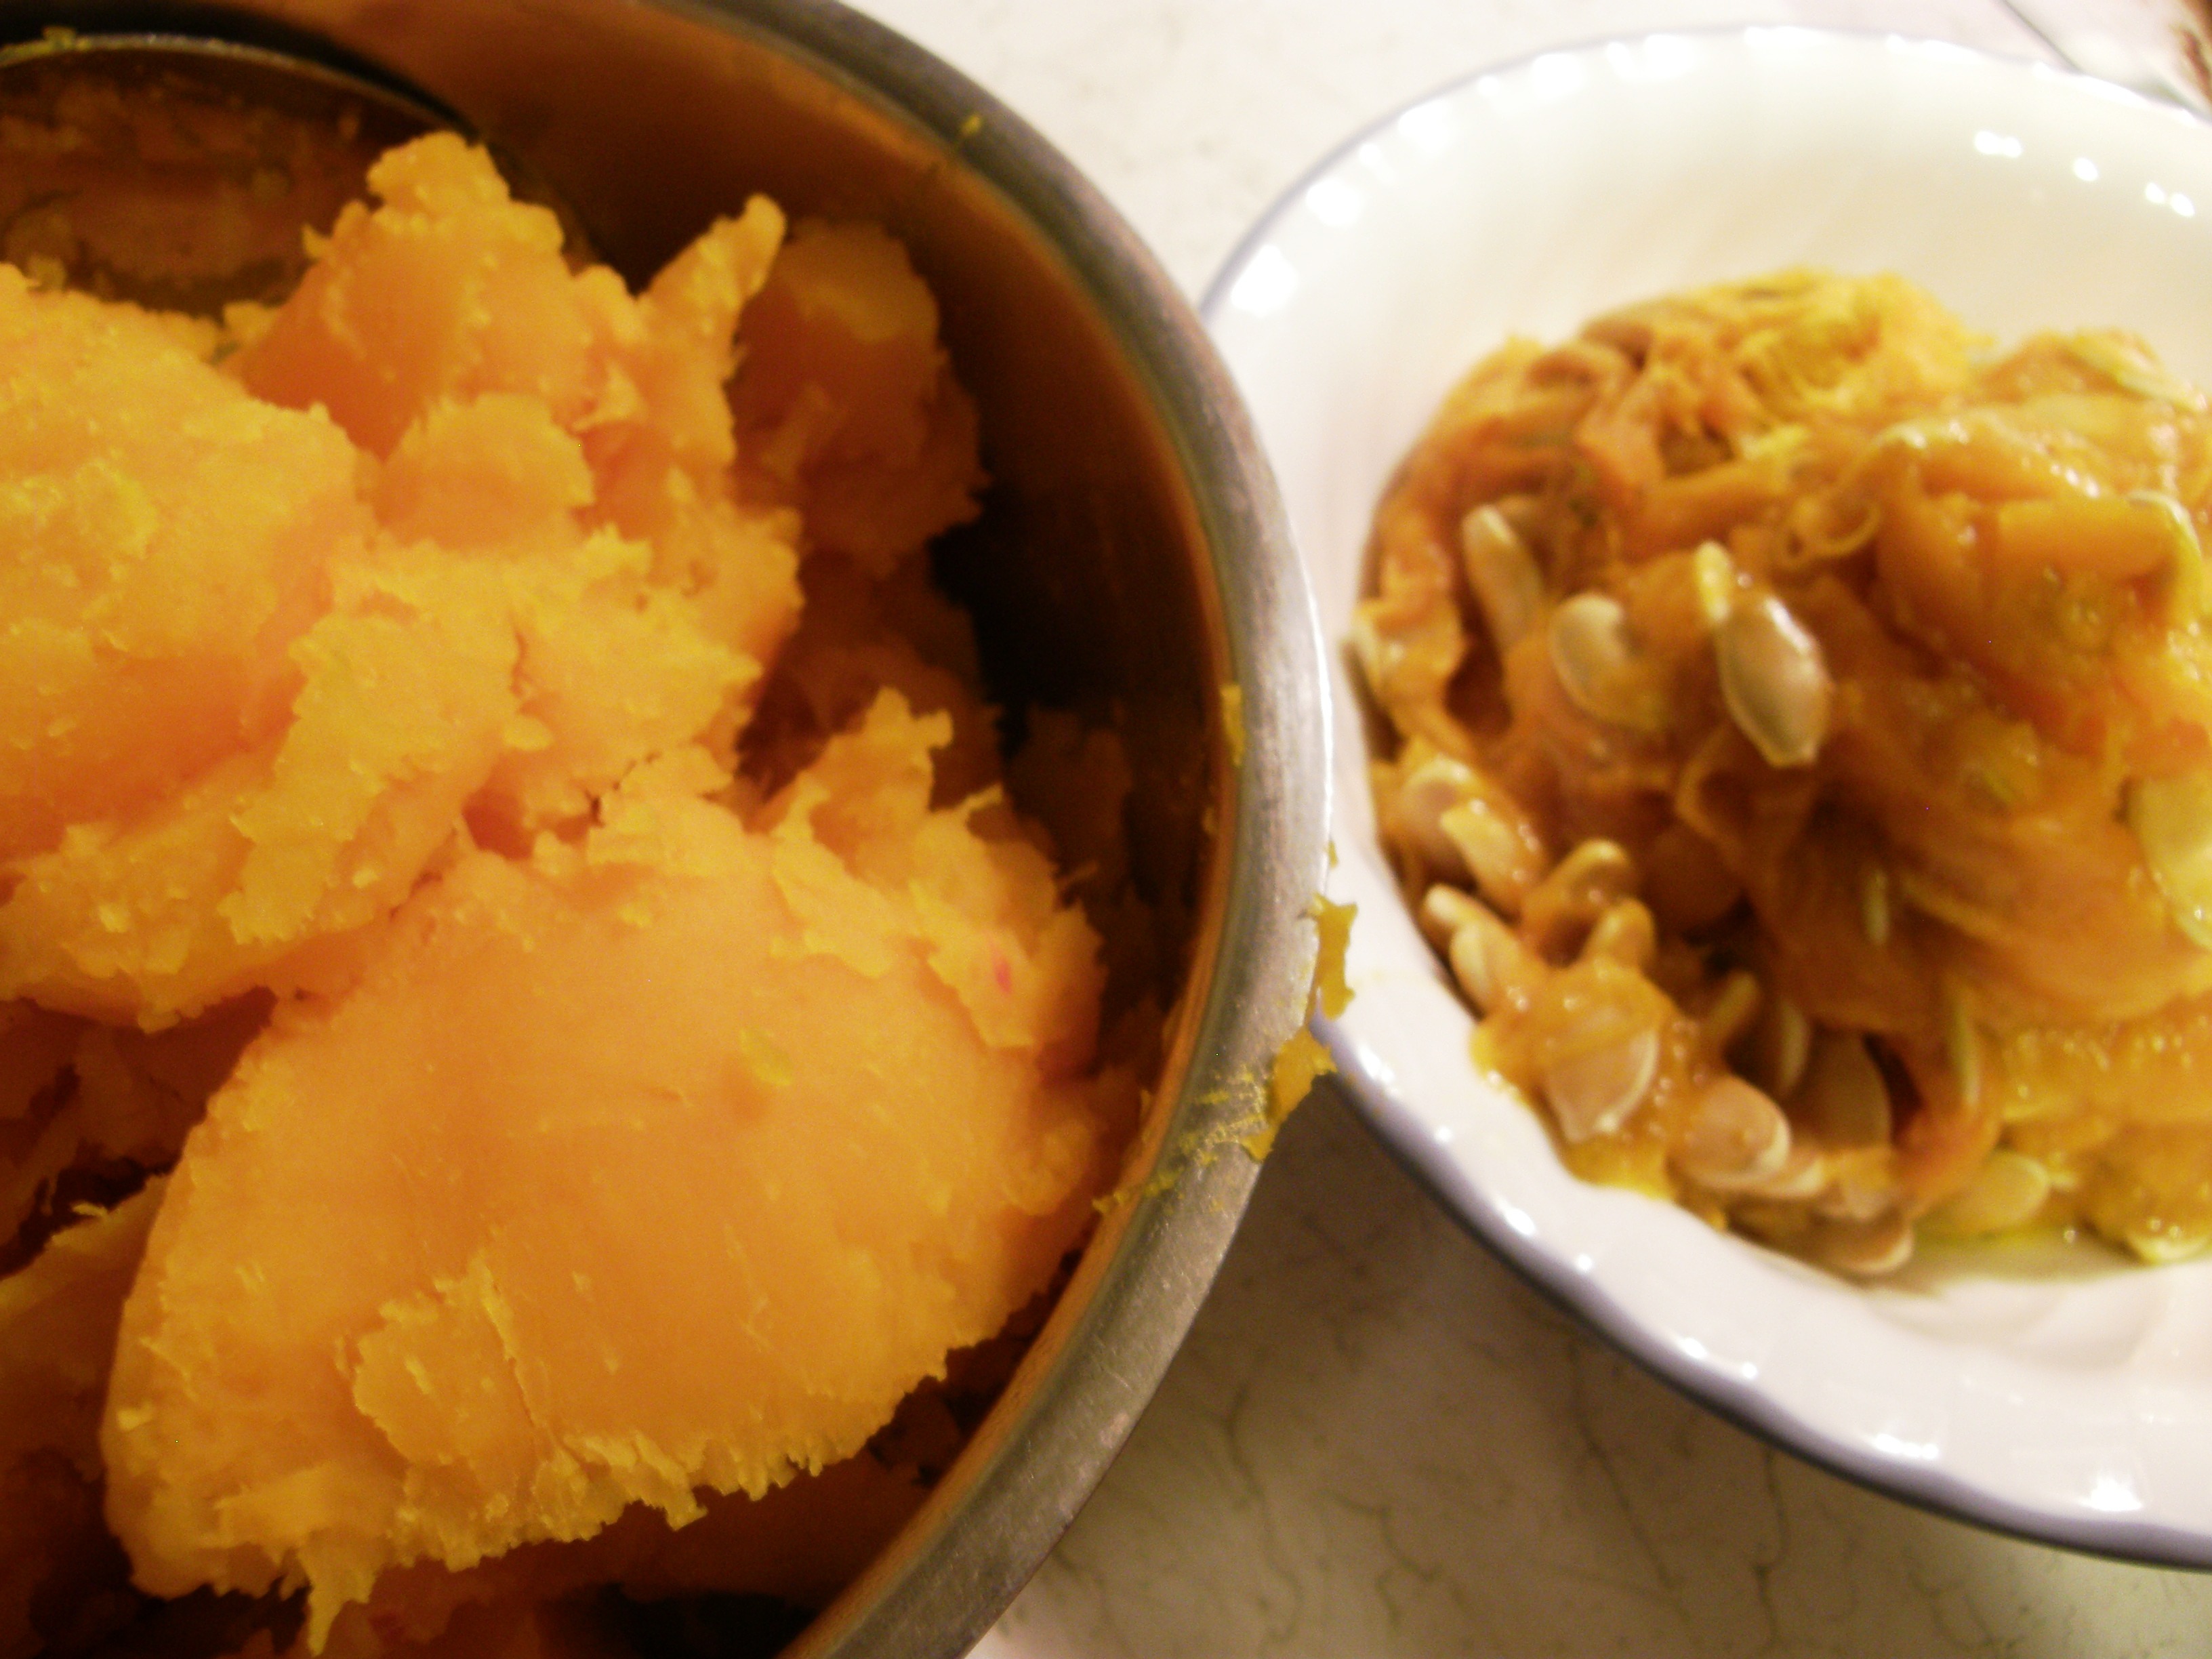 Seeds and Squash in Separate Bowls